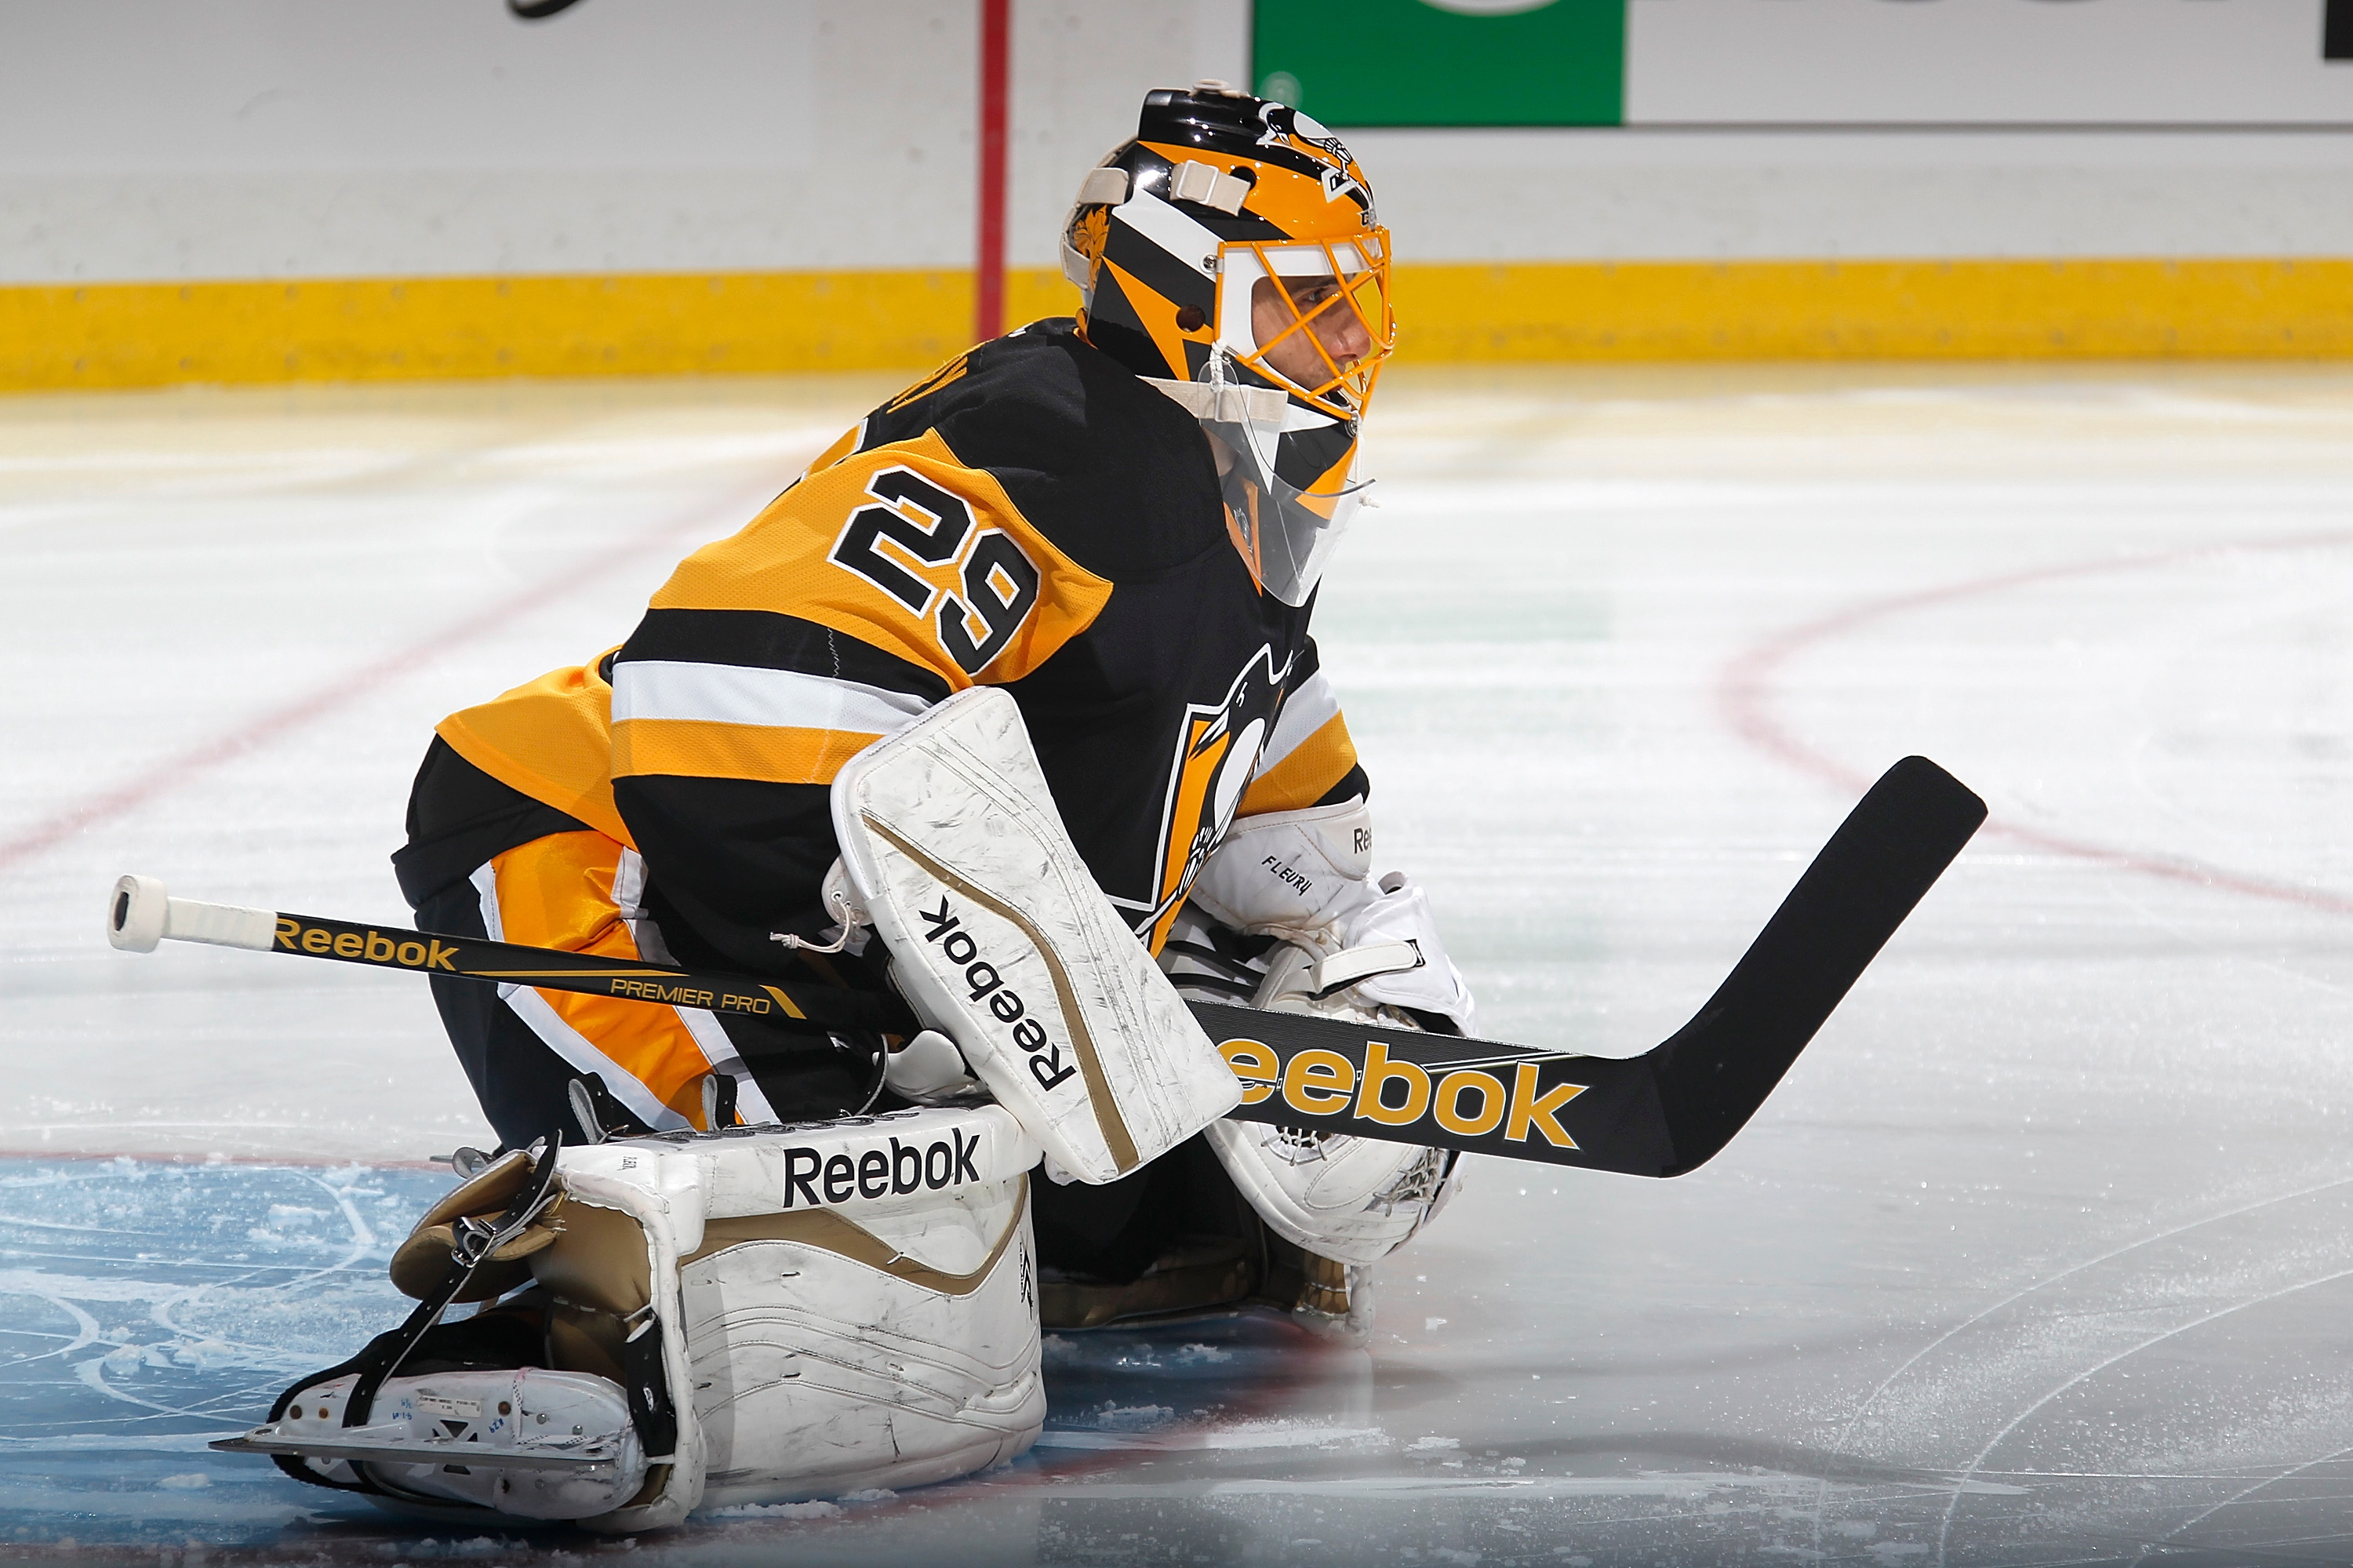 Top 10 Marc-Andre Fleury saves from 2018-19 